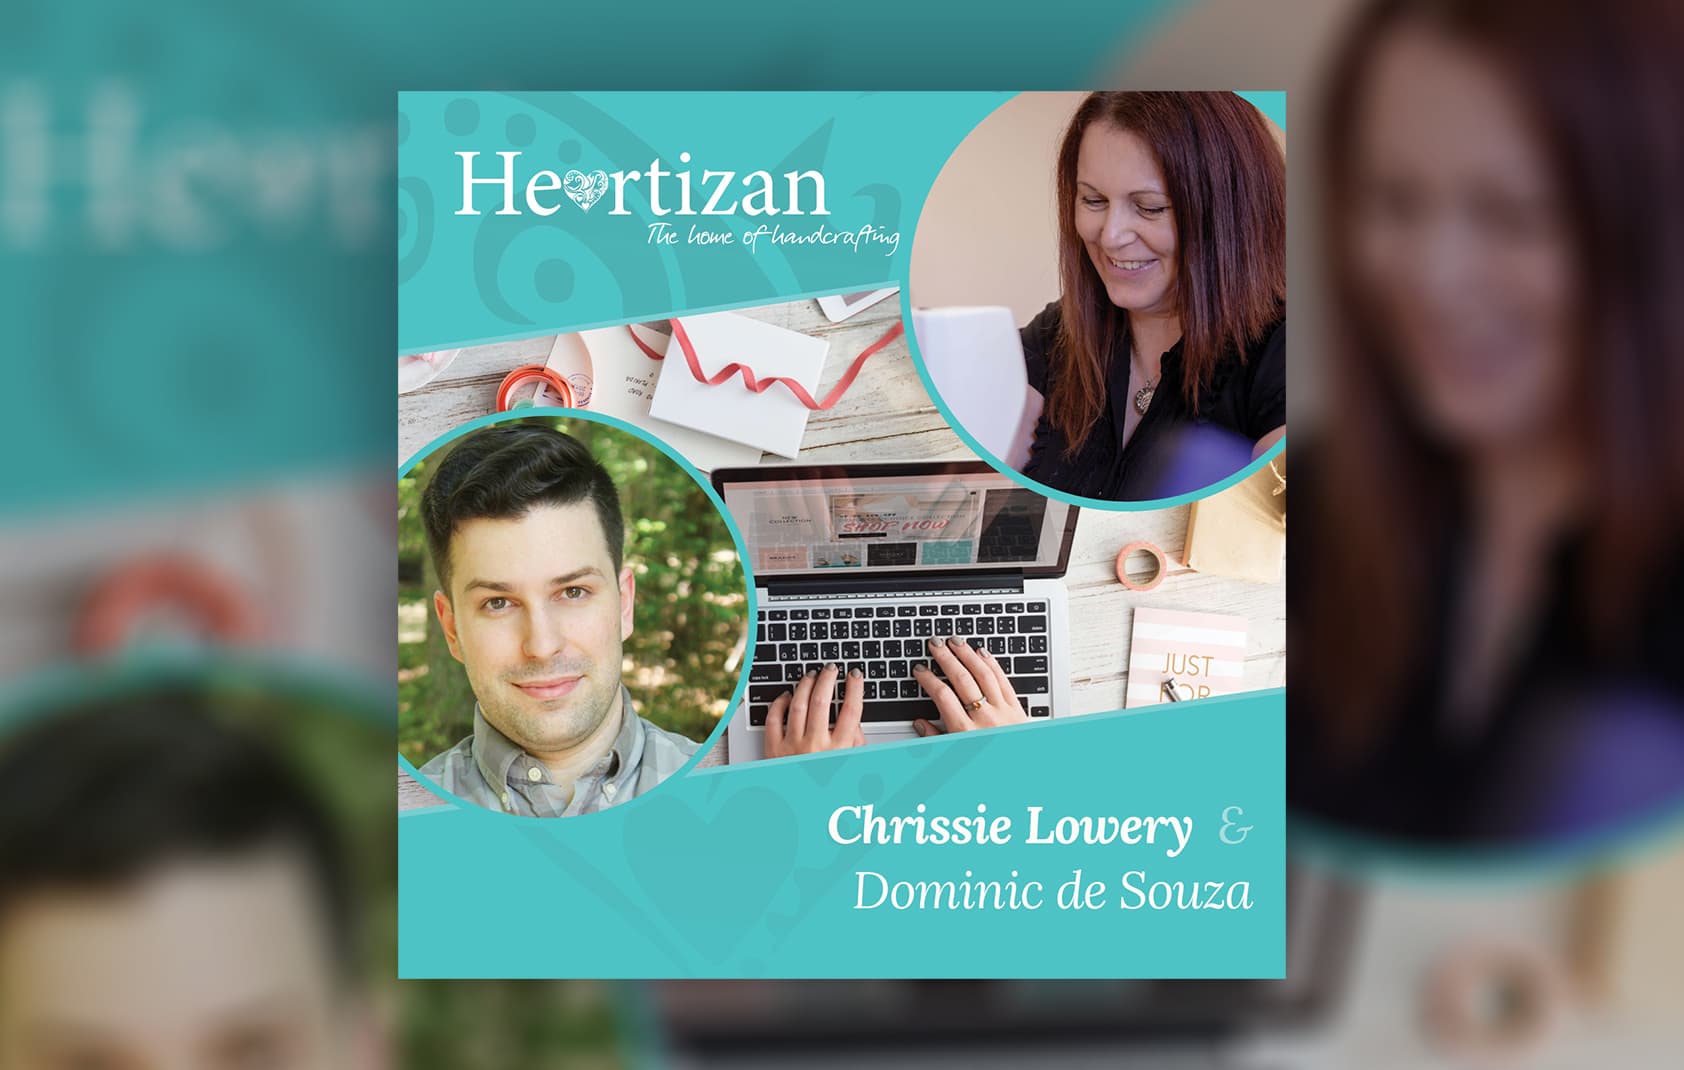 How small businesses can start storytelling | Interview with Chrissy Lowery from Heartizan